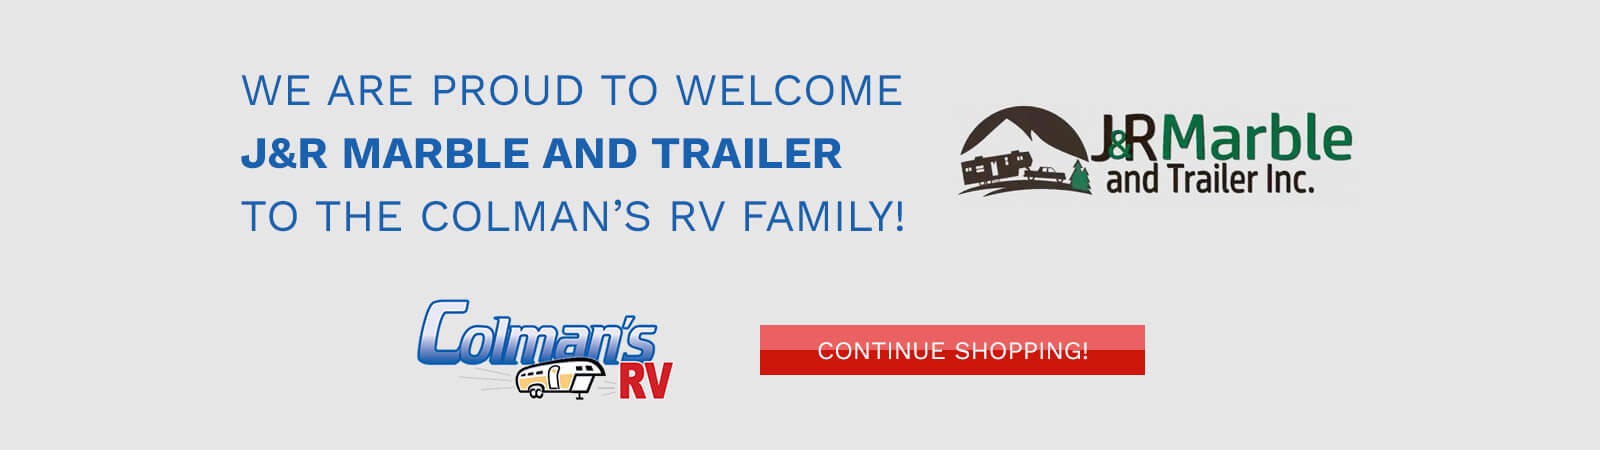 J&R Marble and Trailer has joined the Colman's RV family!